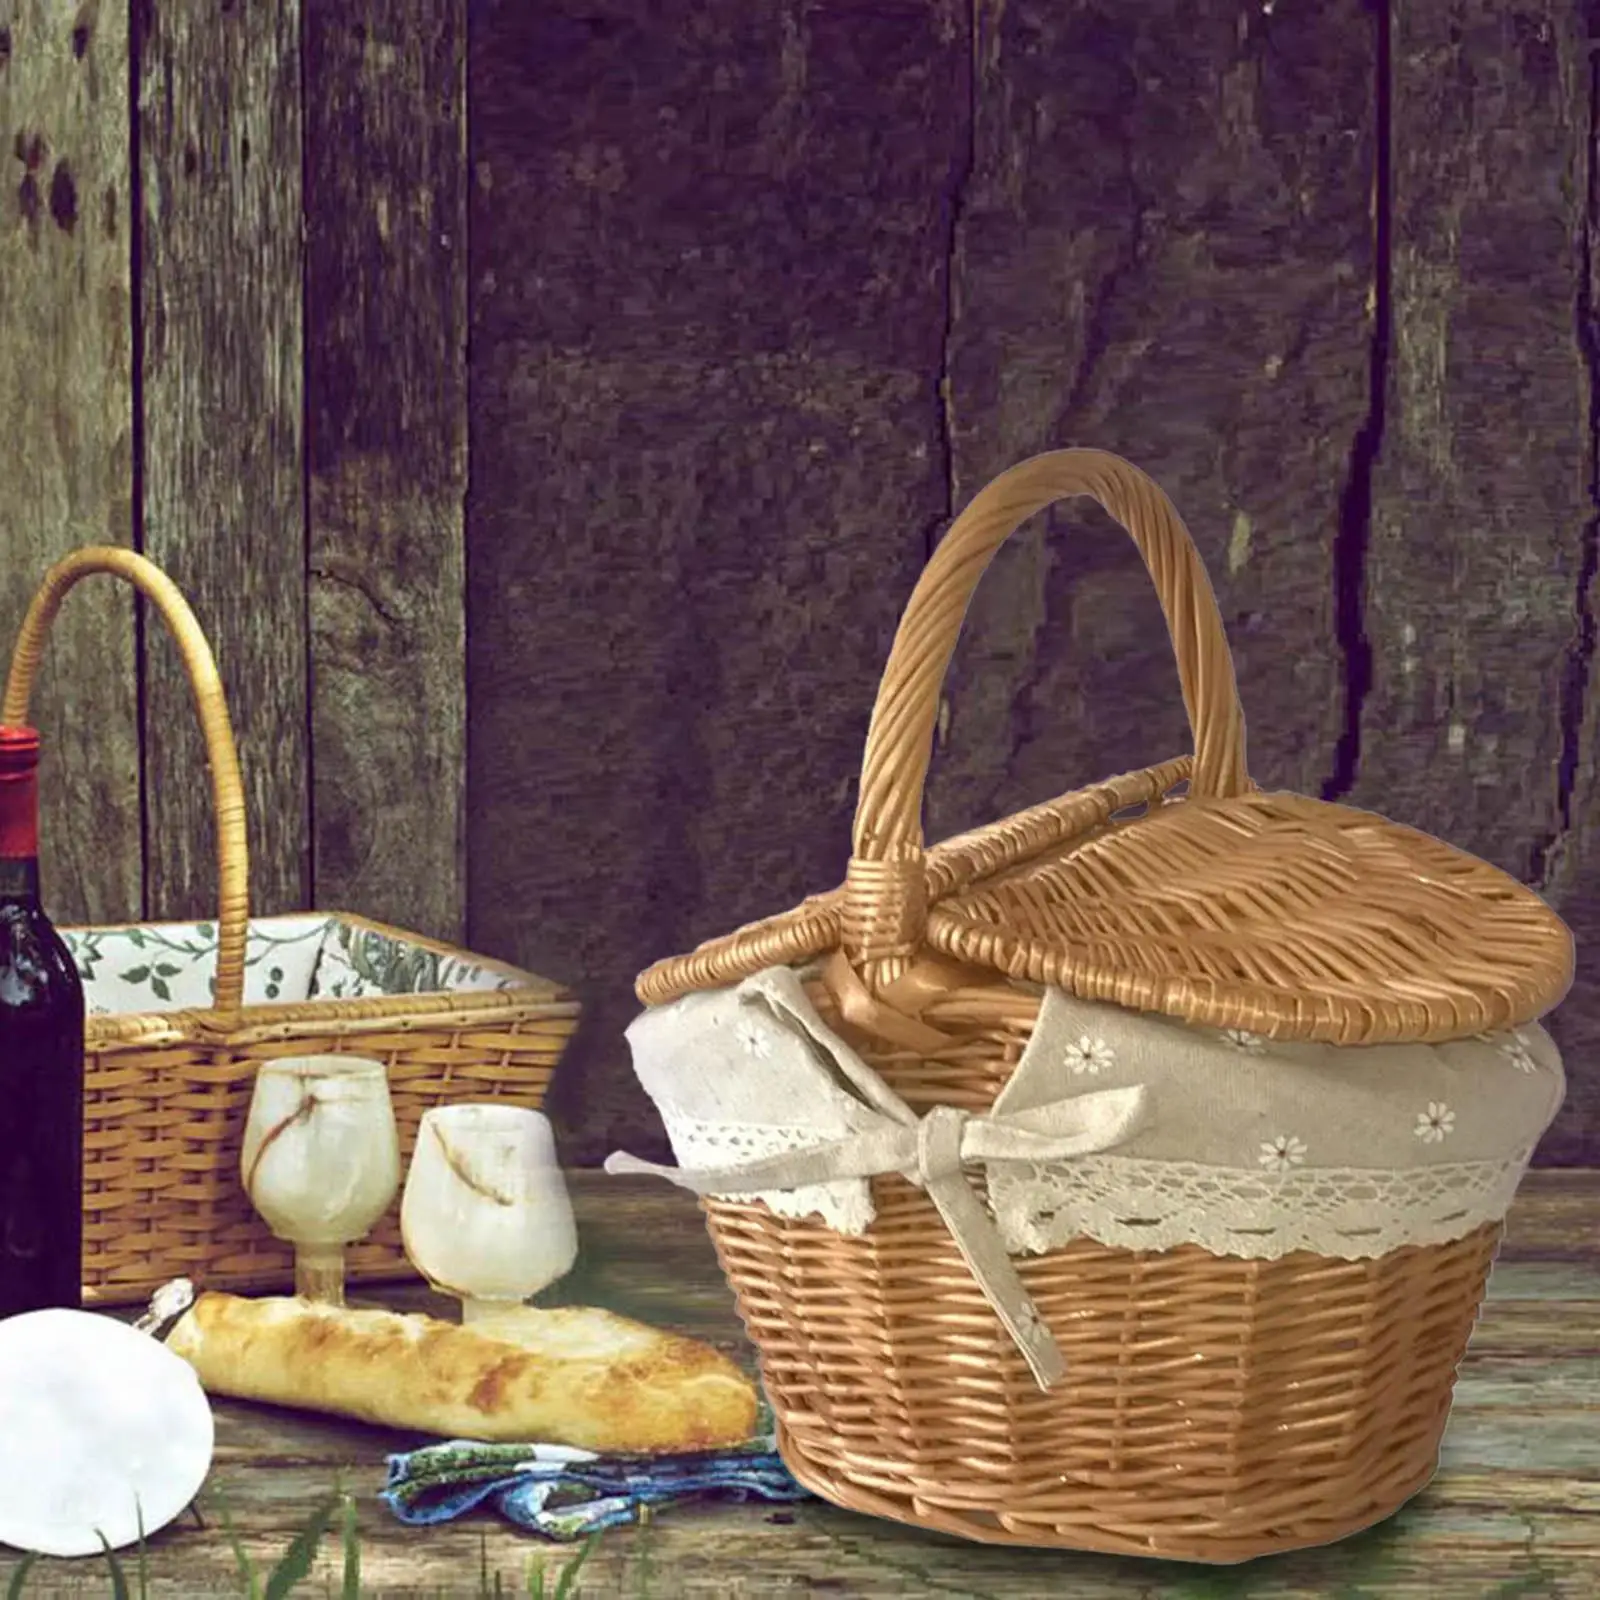 Hand Woven Wicker Picnic Basket Wicker Woven Basket with Washable Lining Rattan Storage Serving Basket for Outdoor Beach Hiking